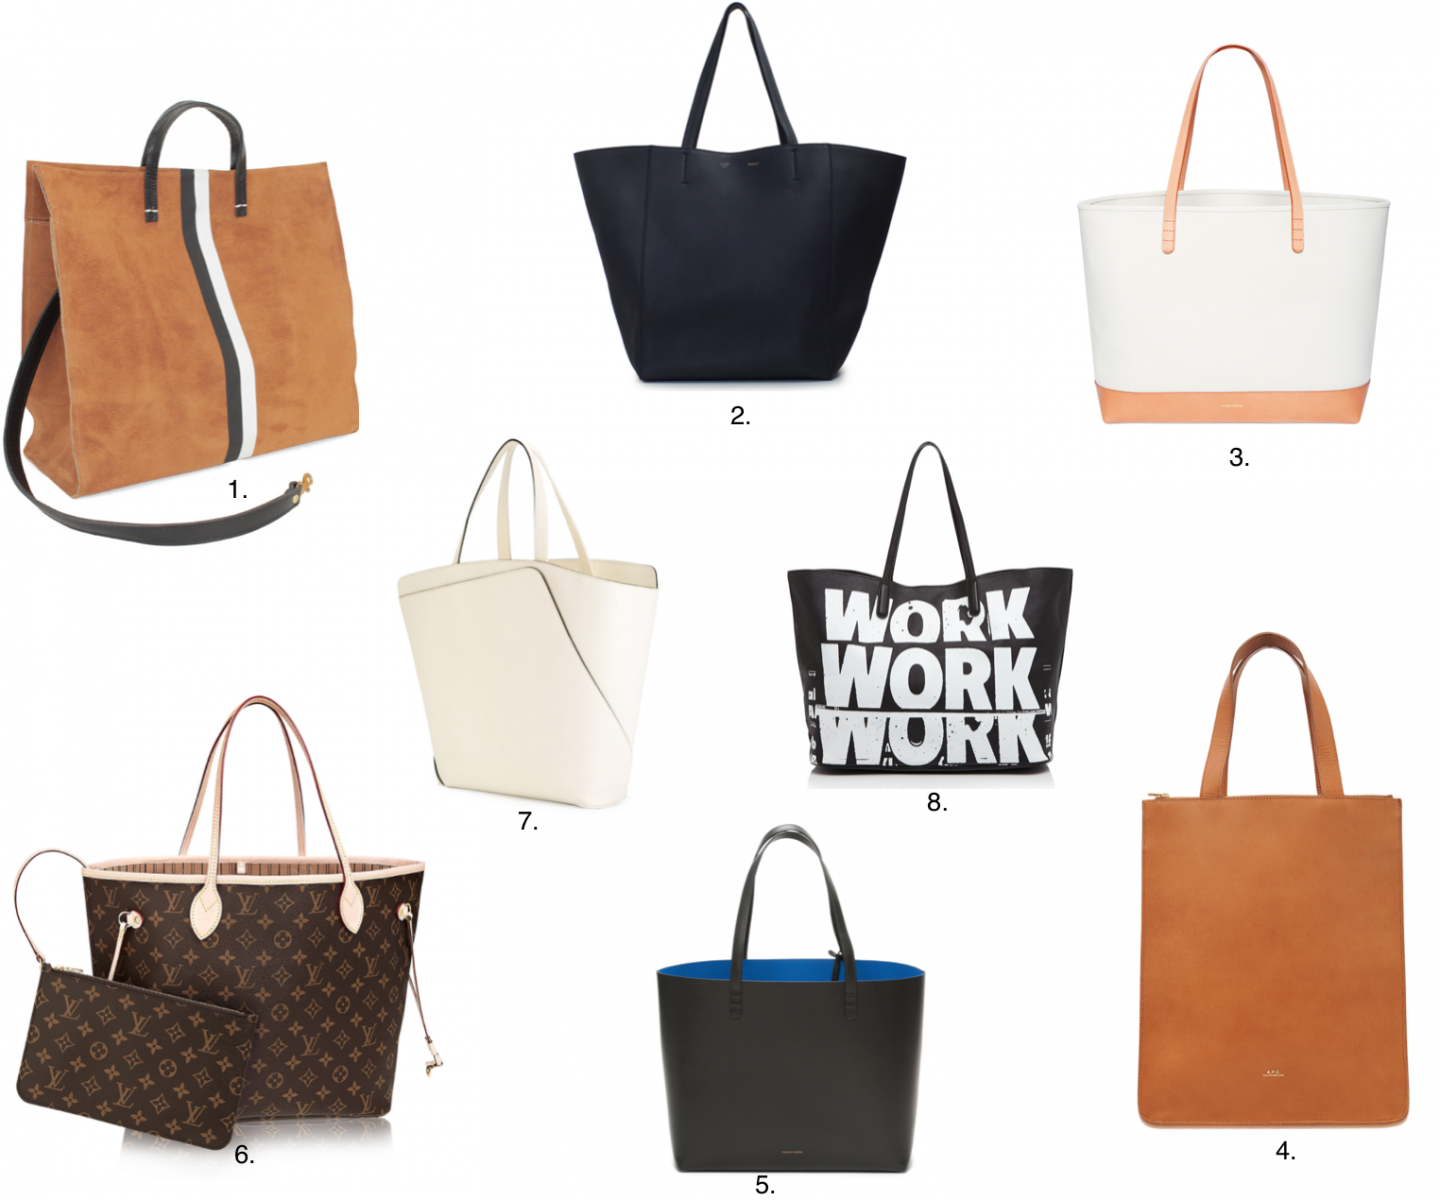 Tote-ally Cool! - Fortune Inspired